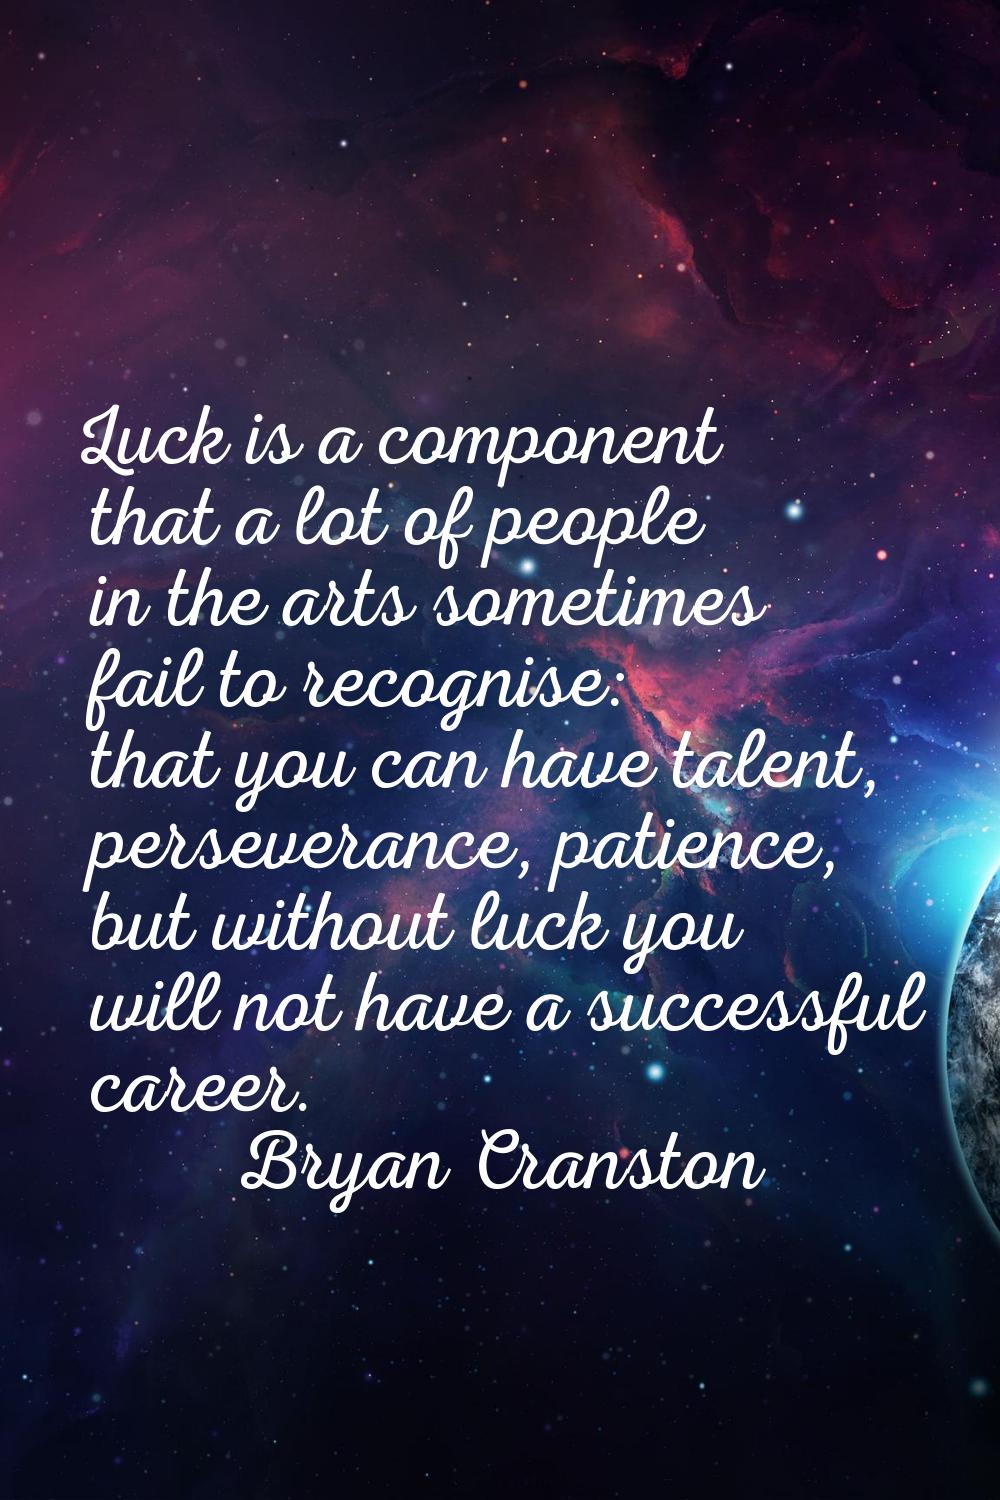 Luck is a component that a lot of people in the arts sometimes fail to recognise: that you can have